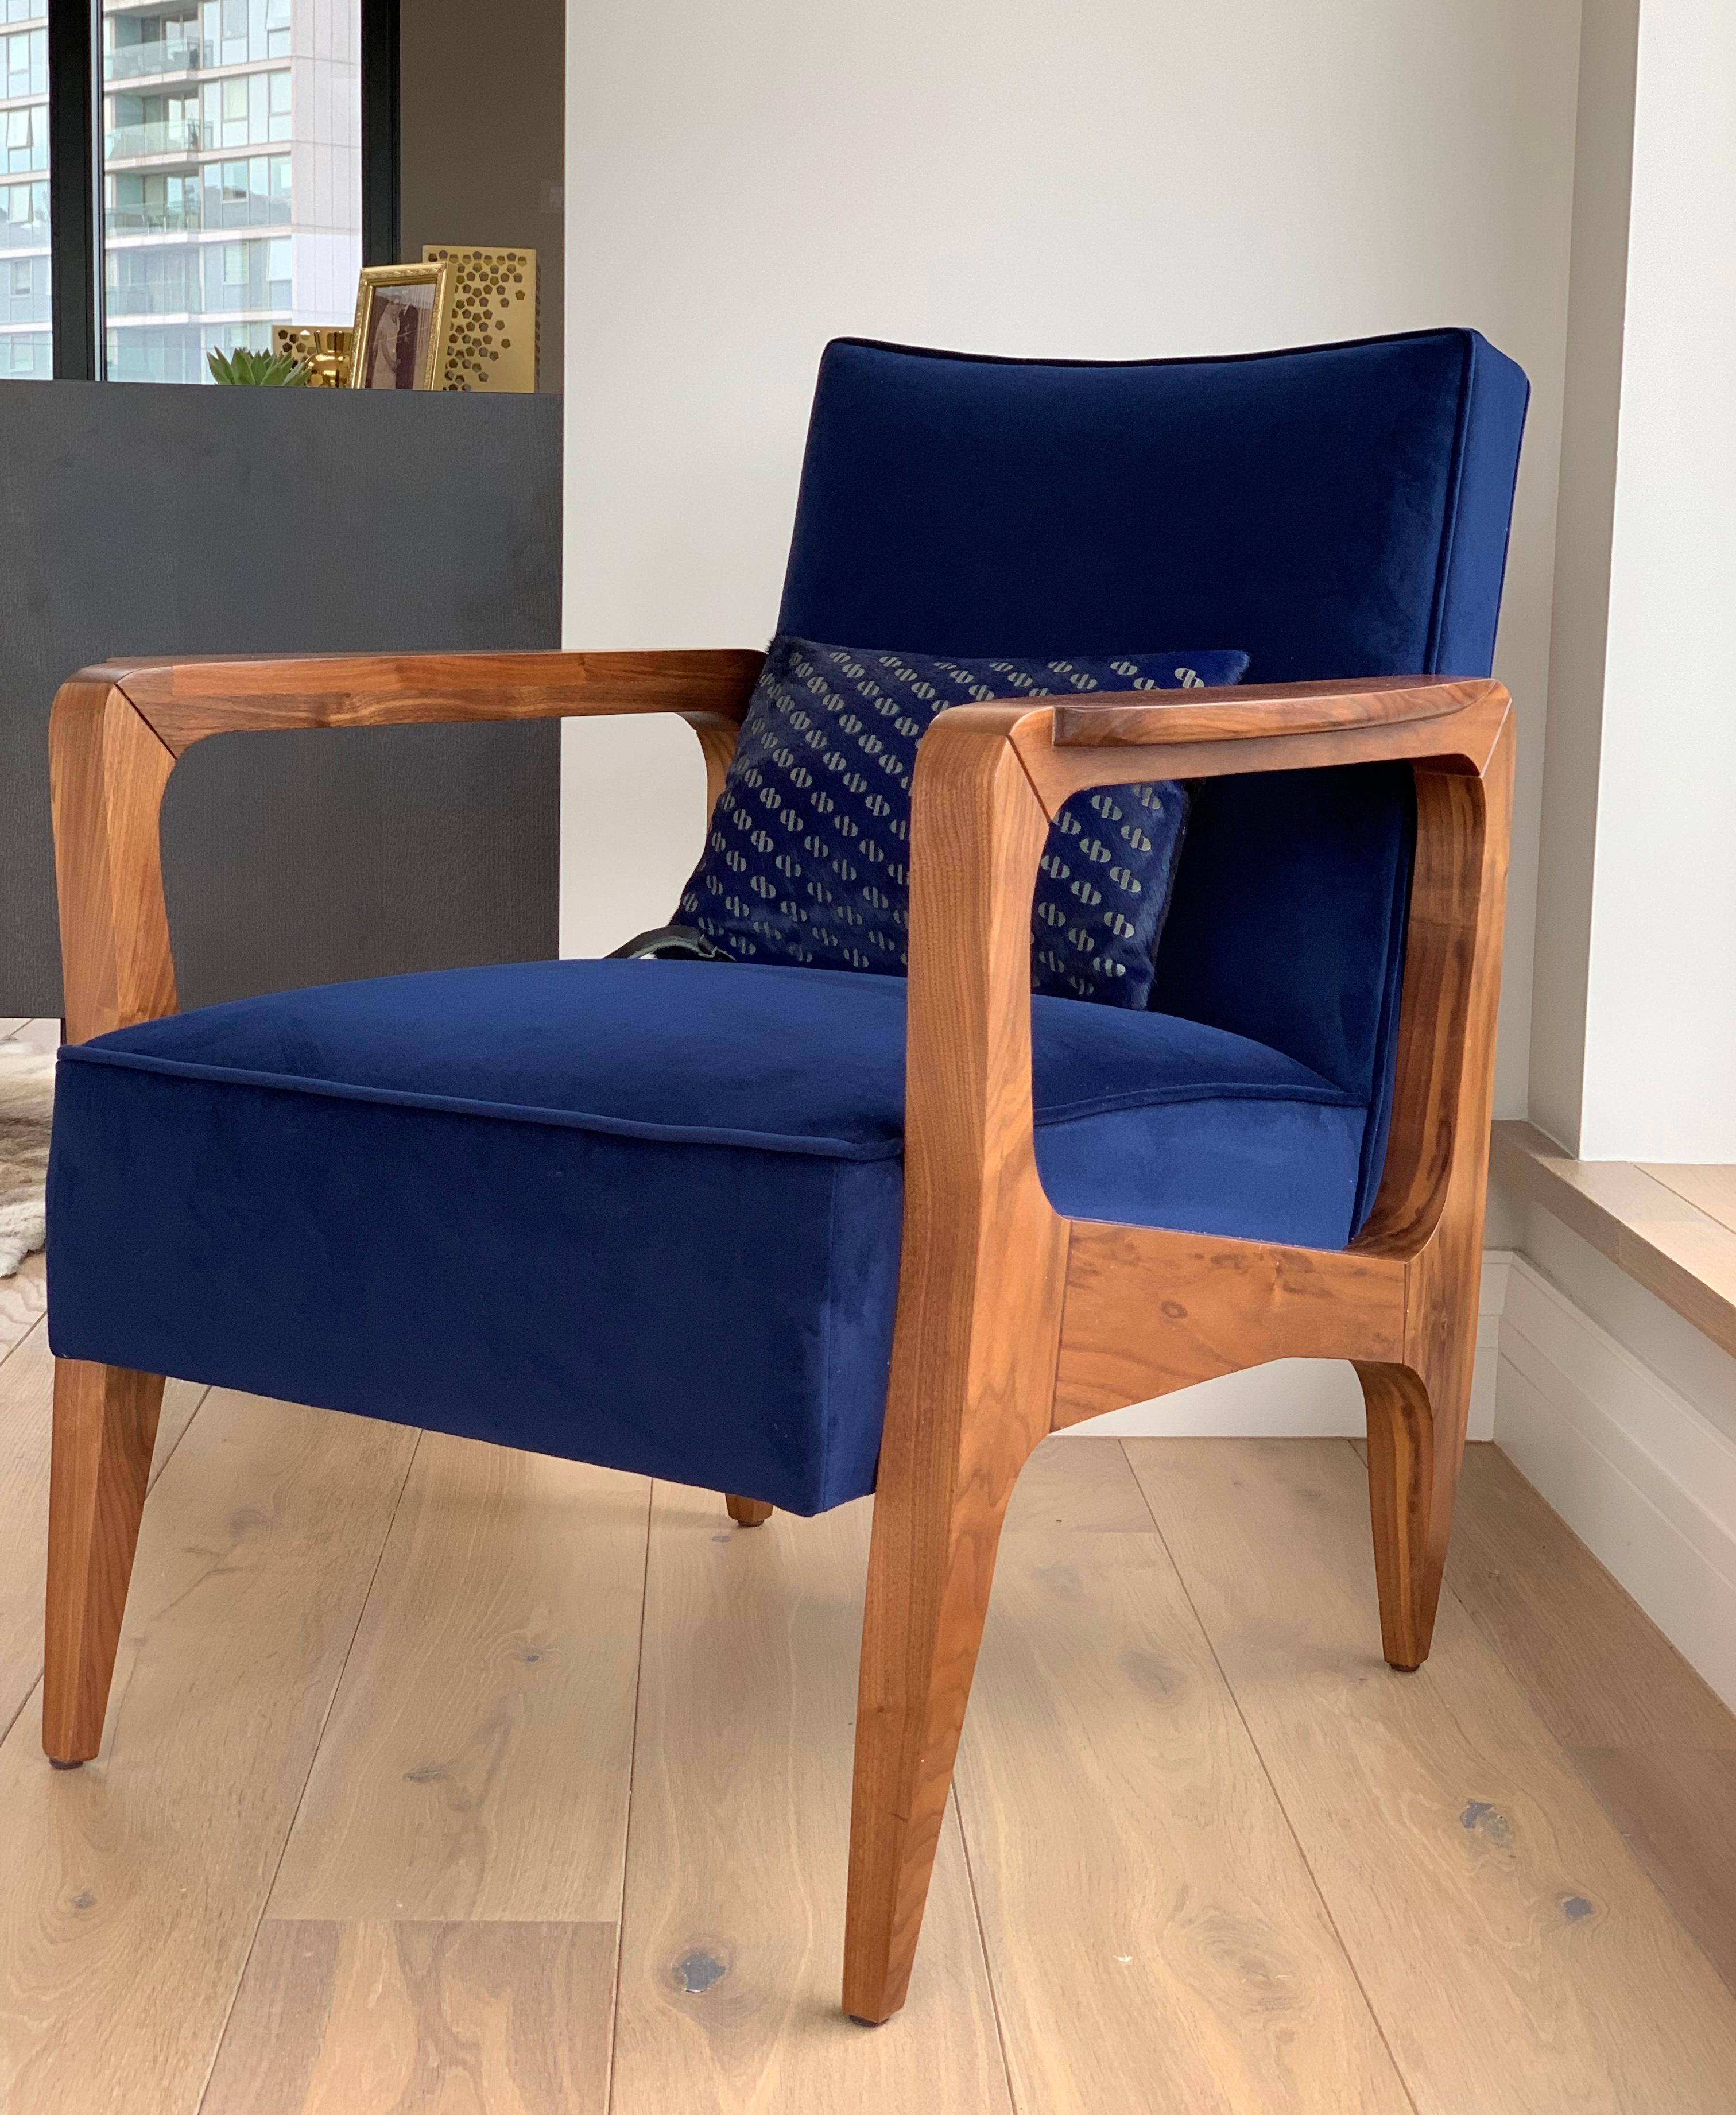 In the modern home, an armchair is no longer just a place to sit and comfortably read your favourite novel, it plays a much larger role in the overall interior aesthetic. Casa Botelho's design philosophy is to ensure that every piece has purpose and